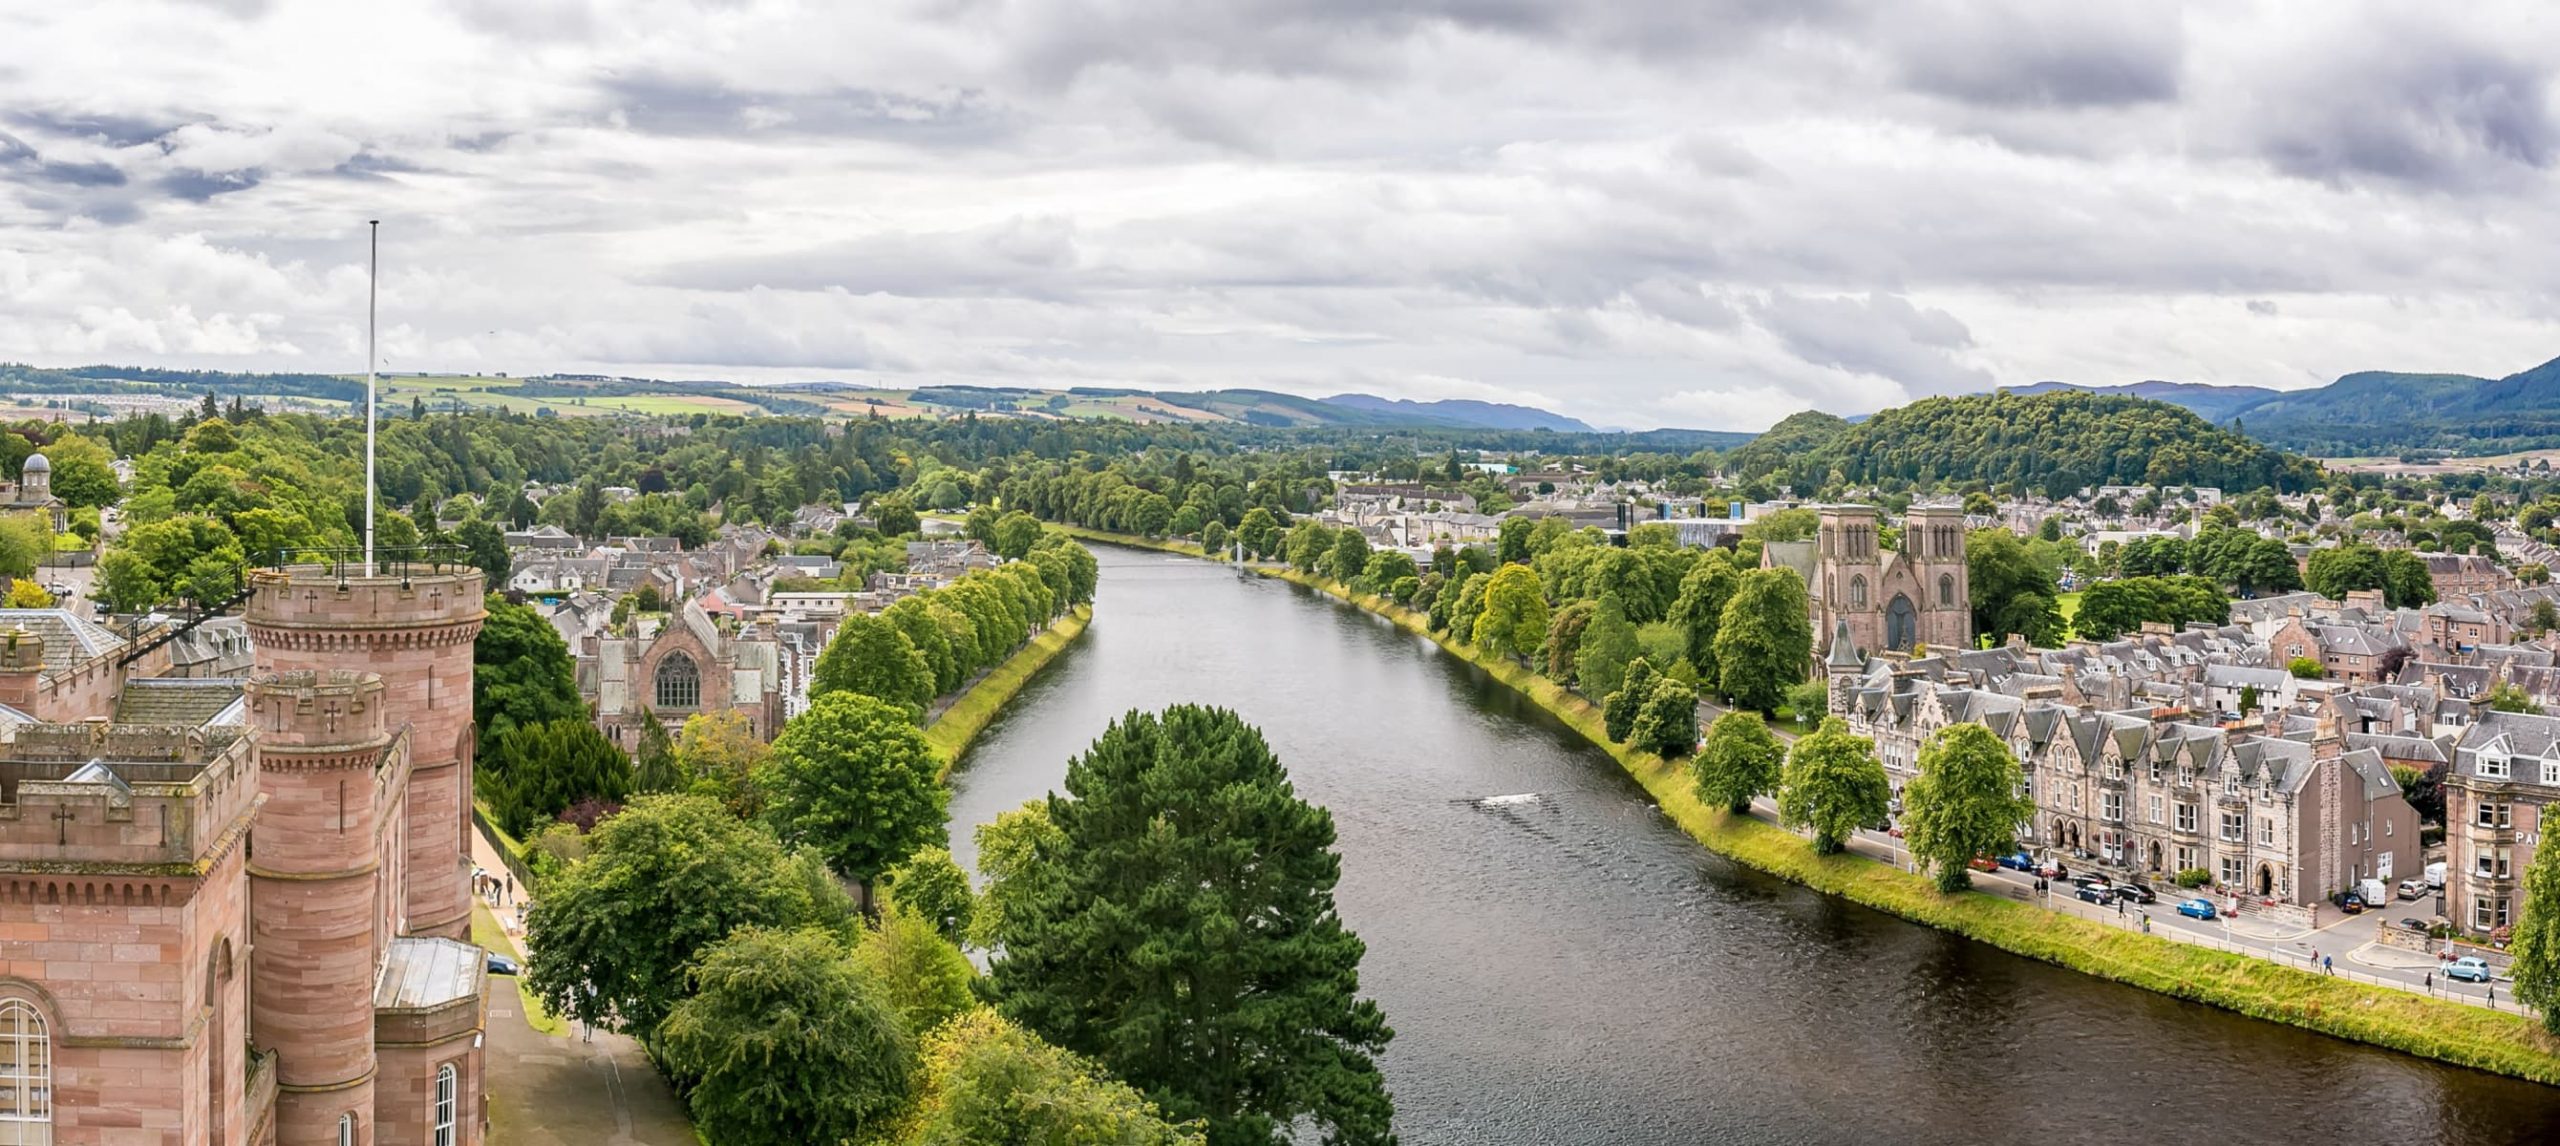 The skyline of the city of Inverness, in Scotland.